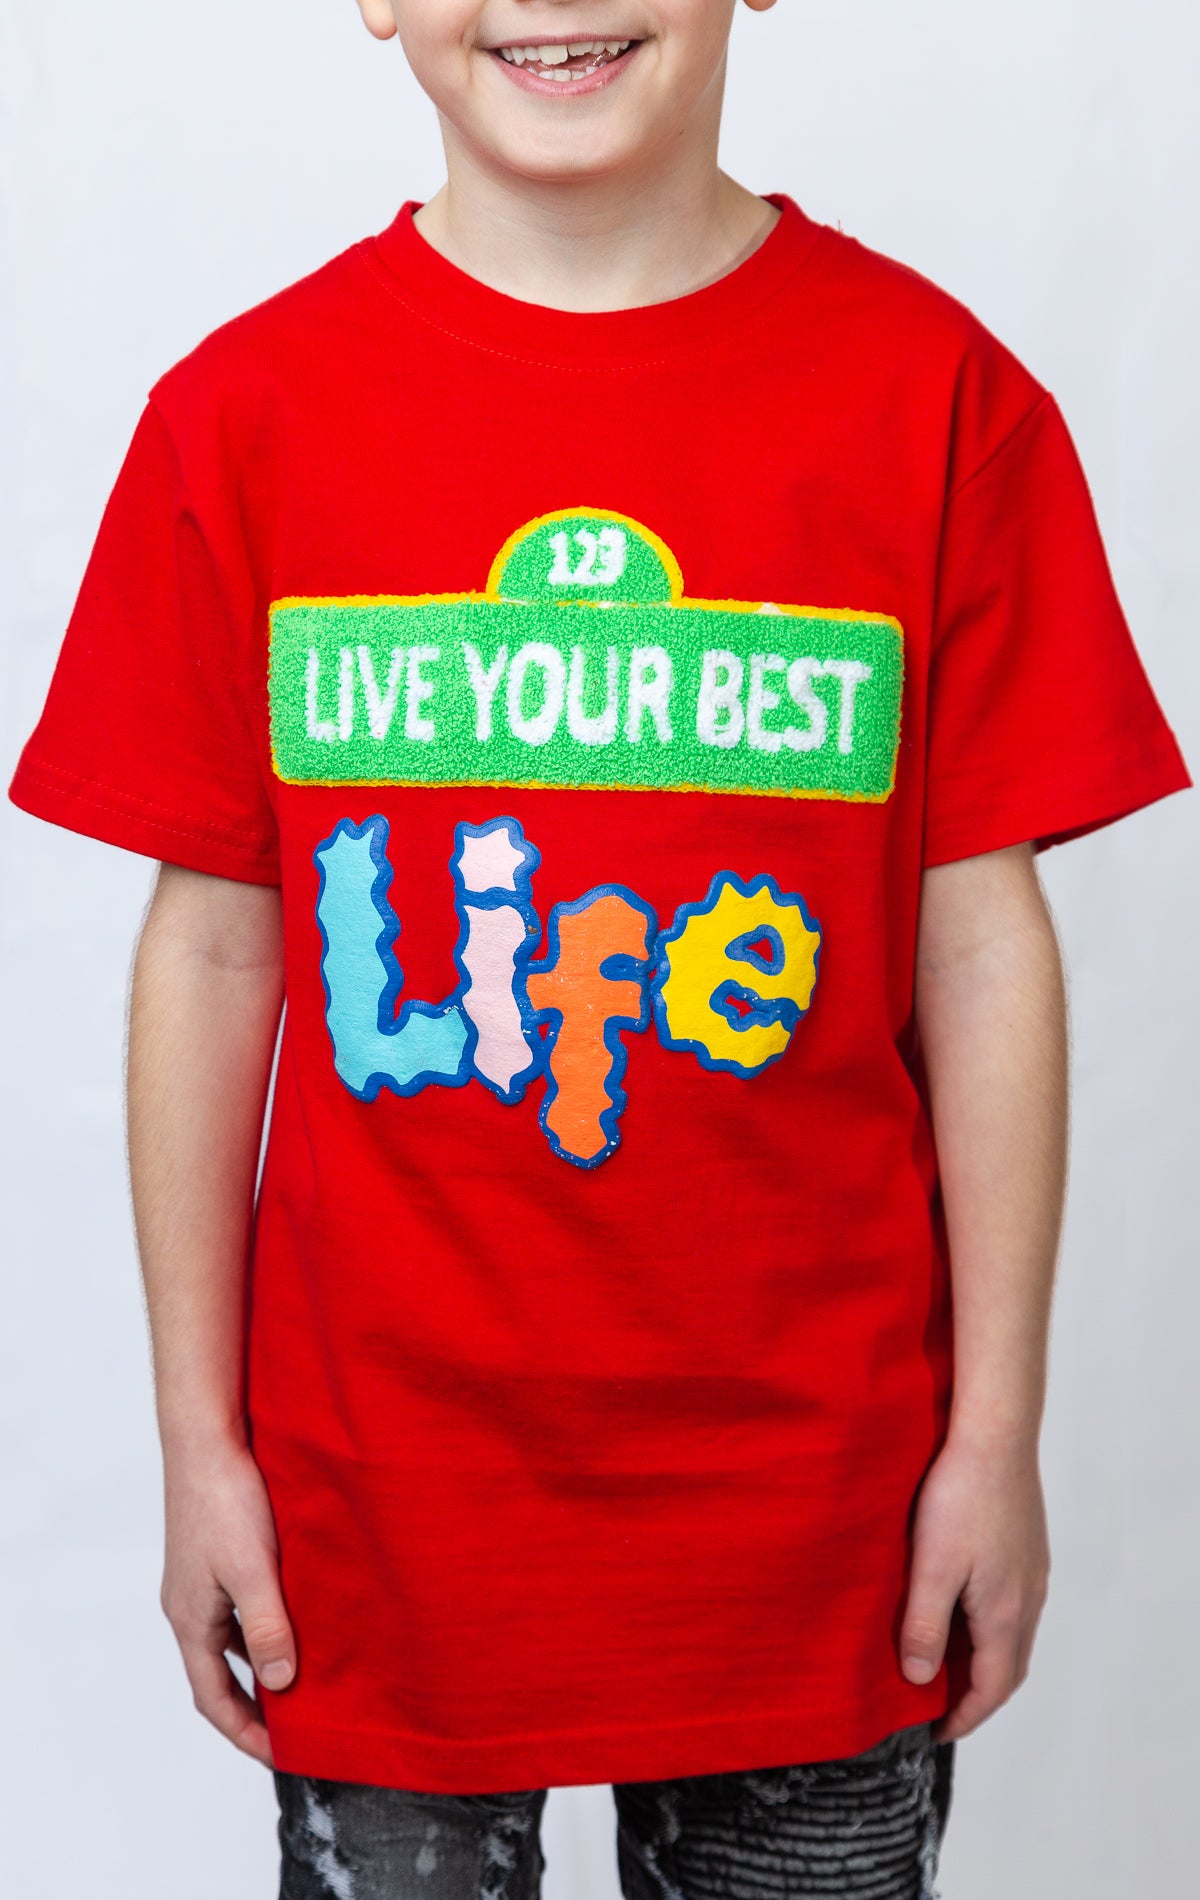 Red Sesame street "Live your best life" graphic t-shirt